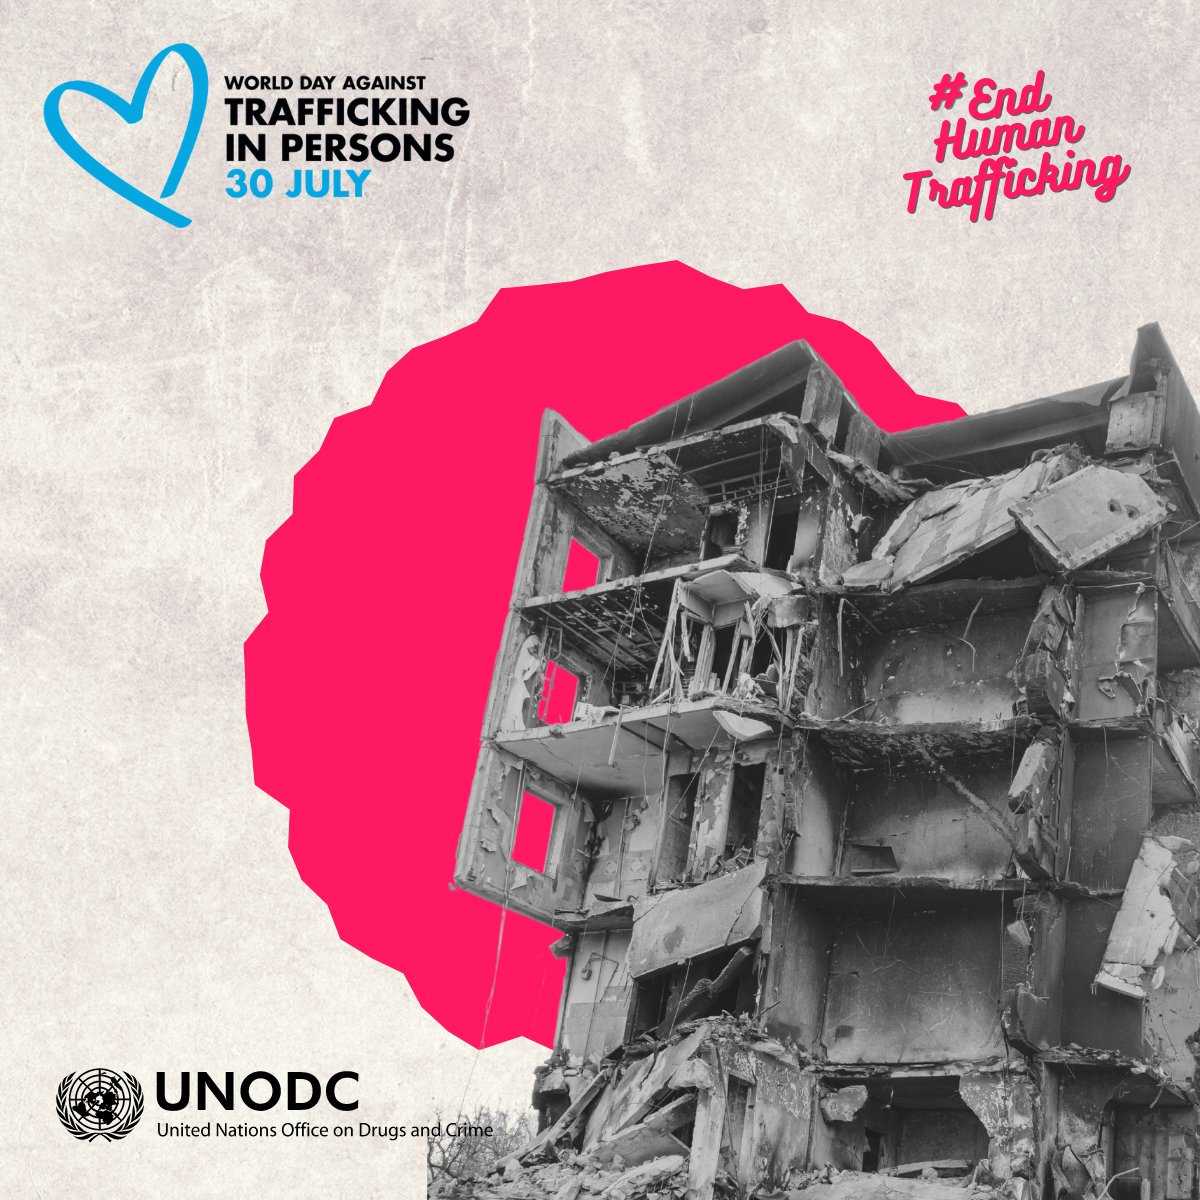 Covid-19, conflict, climate change. A perfect storm of multiple crises has left many more people vulnerable to #HumanTrafficking. Join an event on 1 August at 1.15 ET at UNHQ & online bit.ly/43zSrnE to hear experts reflect on how to protect & prevent more victims.